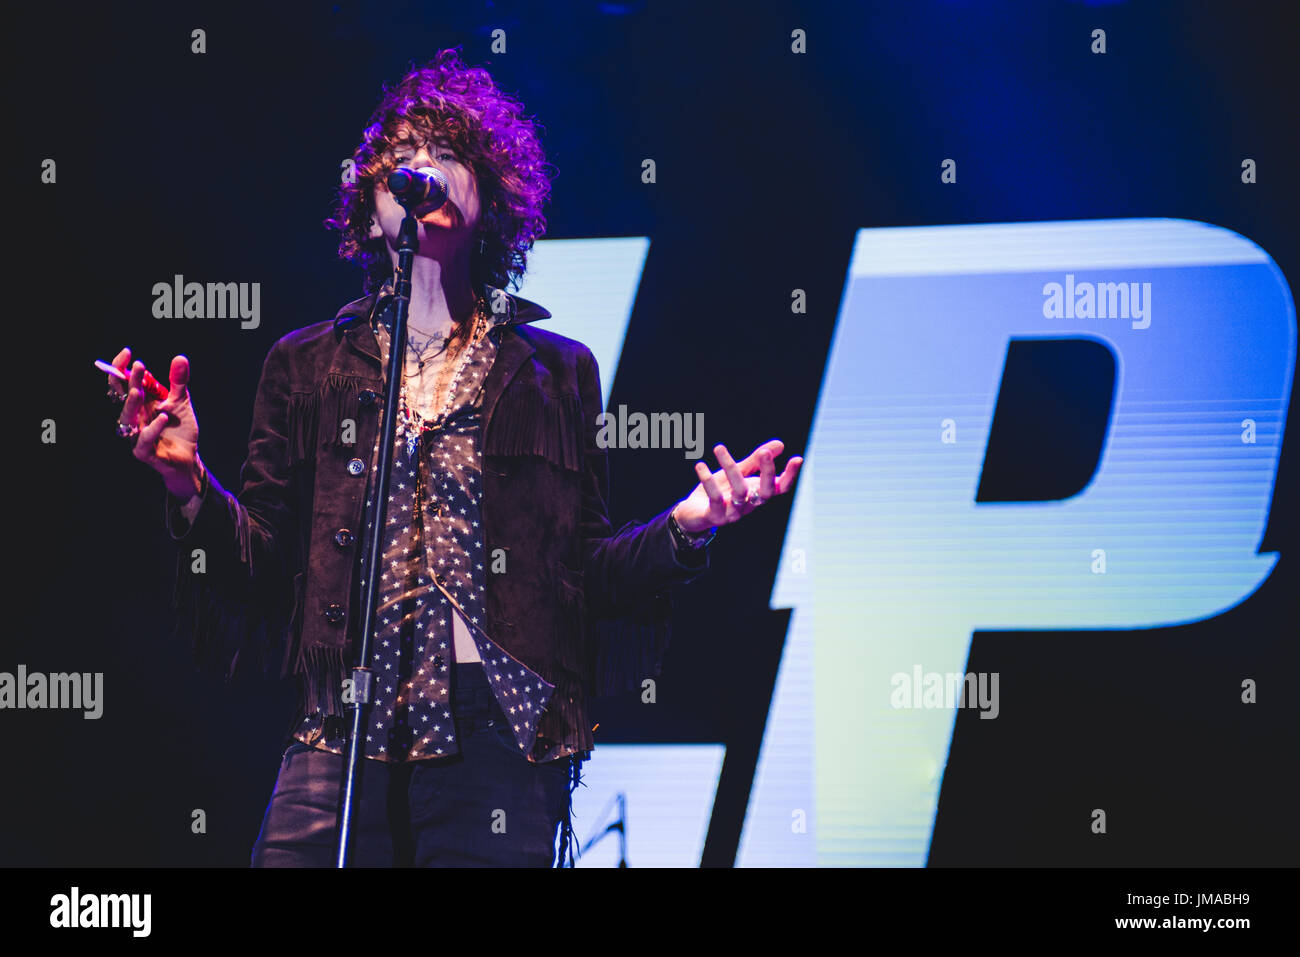 Grugliasco, Italy. 25th July, 2017. The American singer and songwriter LP performing live on stage at the Gruvillage Festival 2017 in Grugliasco, near Torino. Credit: Alessandro Bosio/Pacific Press/Alamy Live News Stock Photo